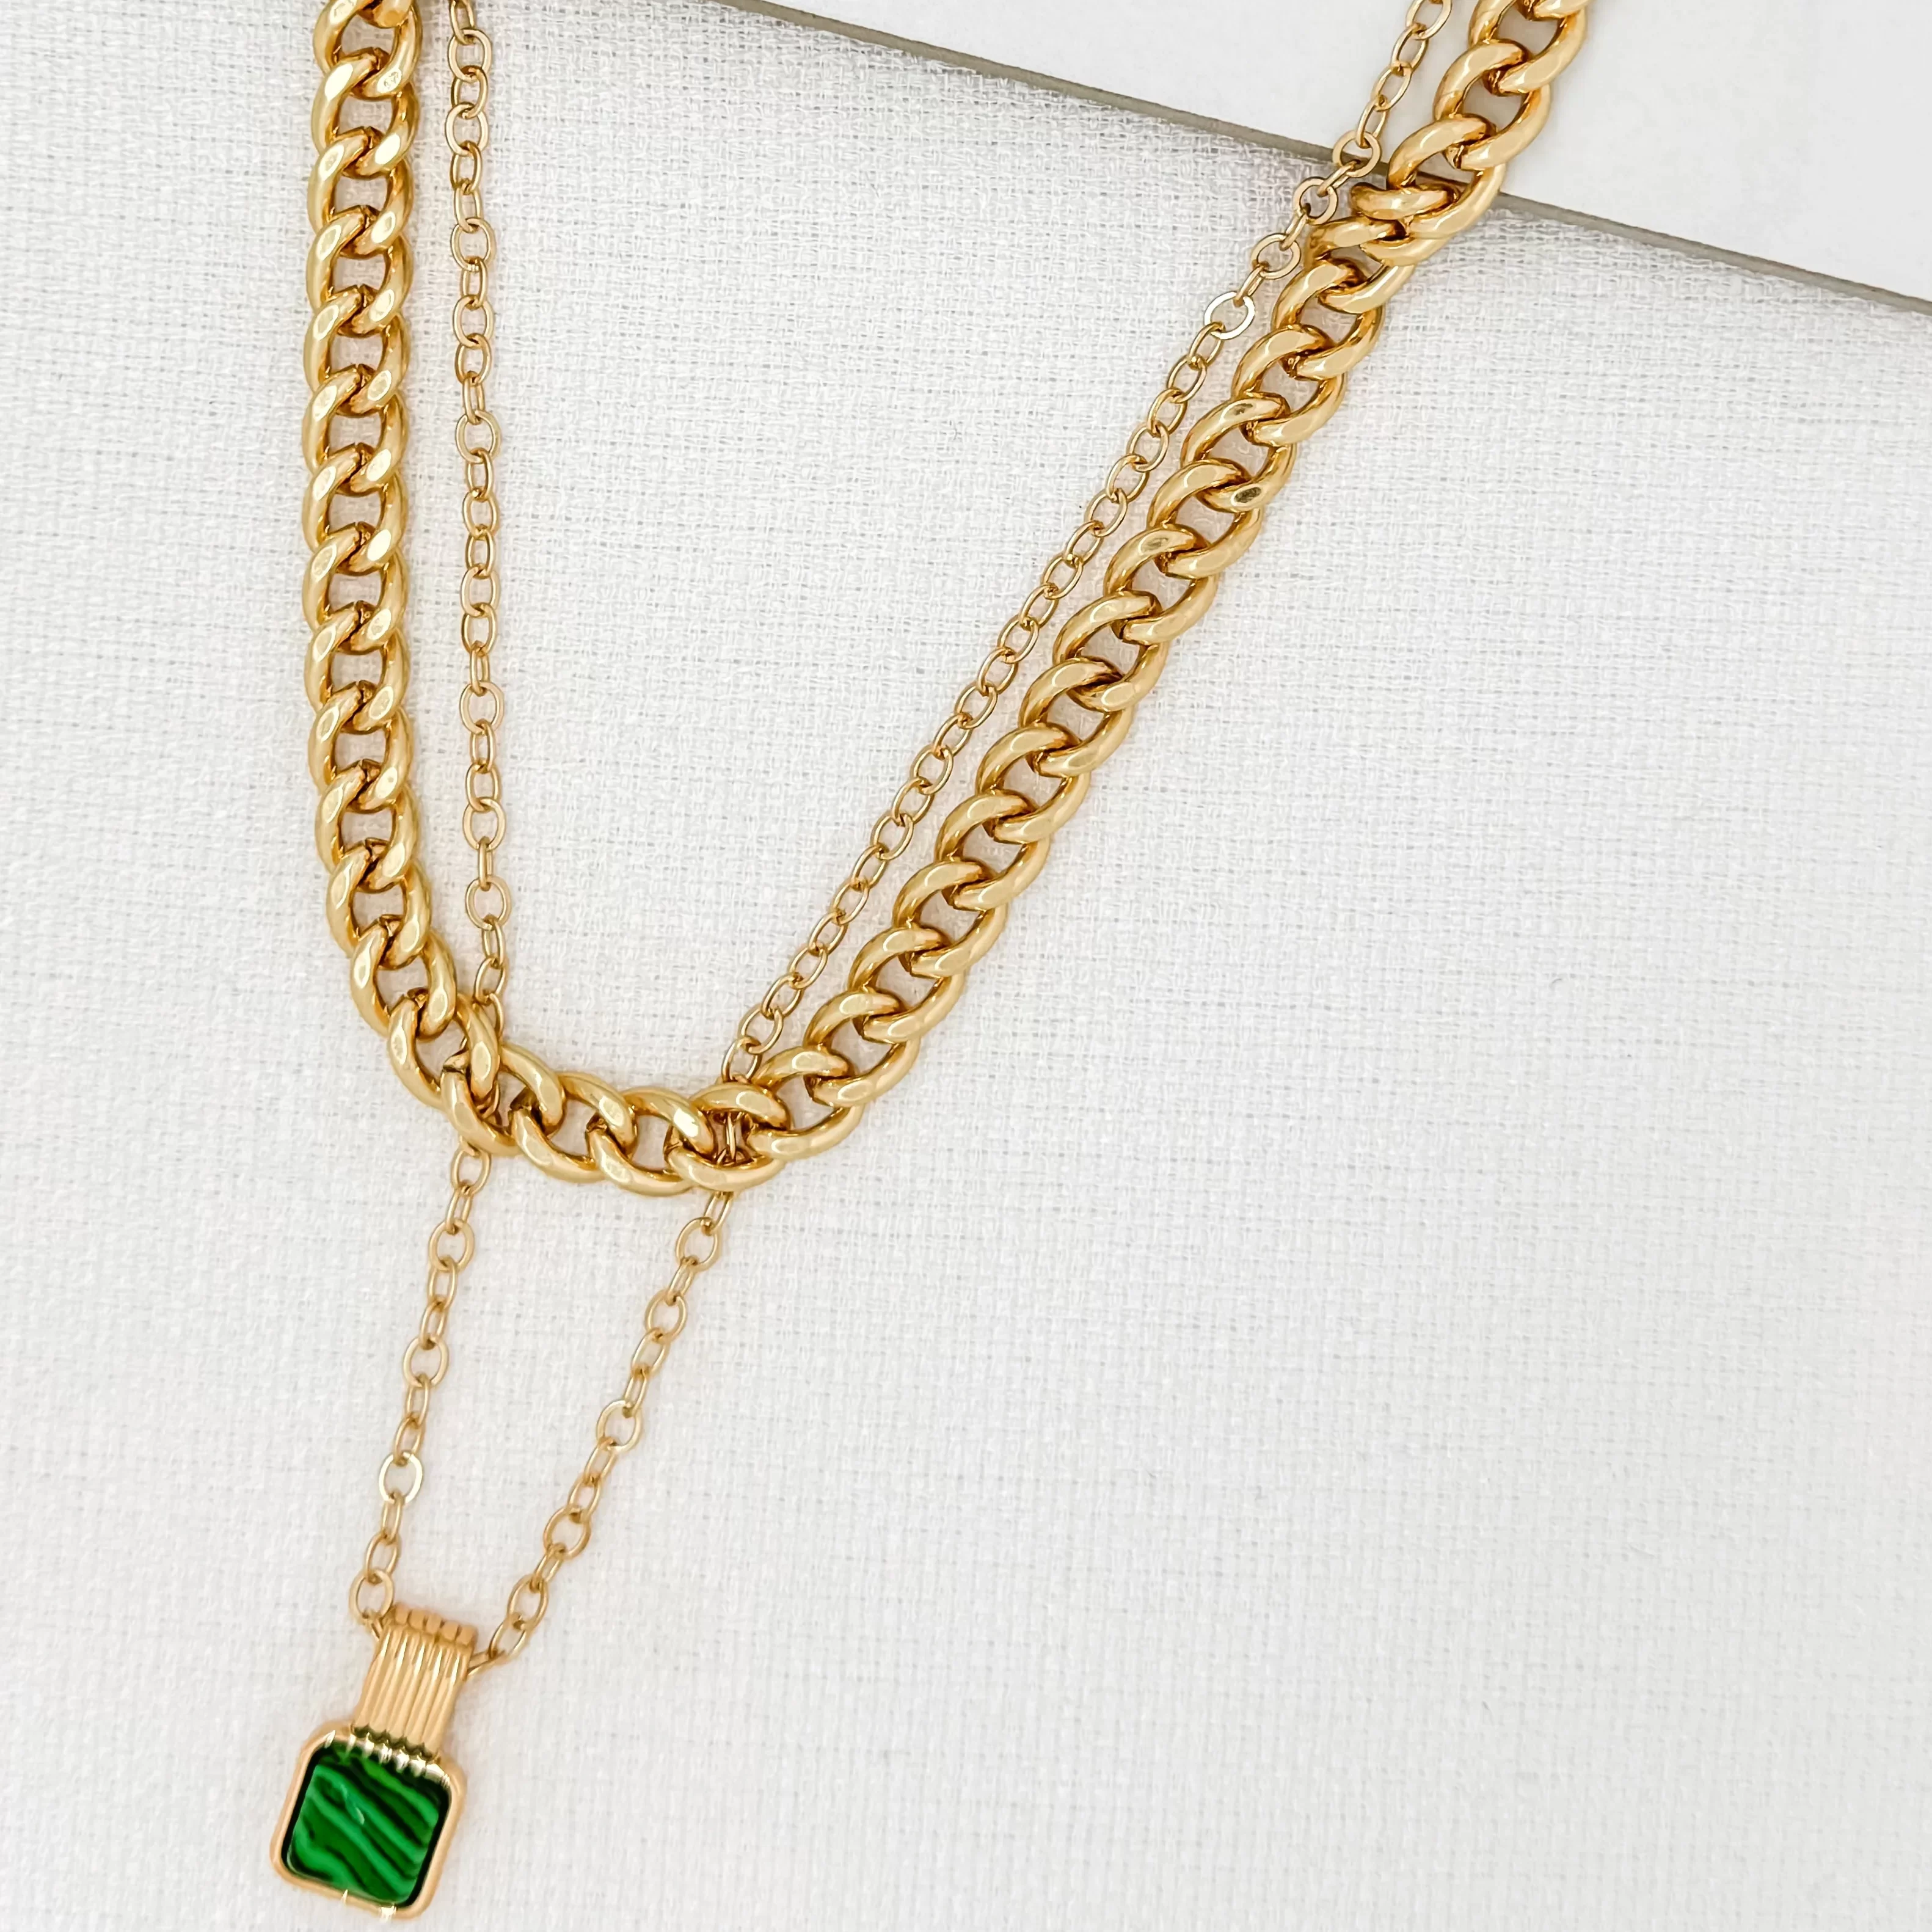 Envy Short Gold Double Layer Necklace with Green Square Pendant